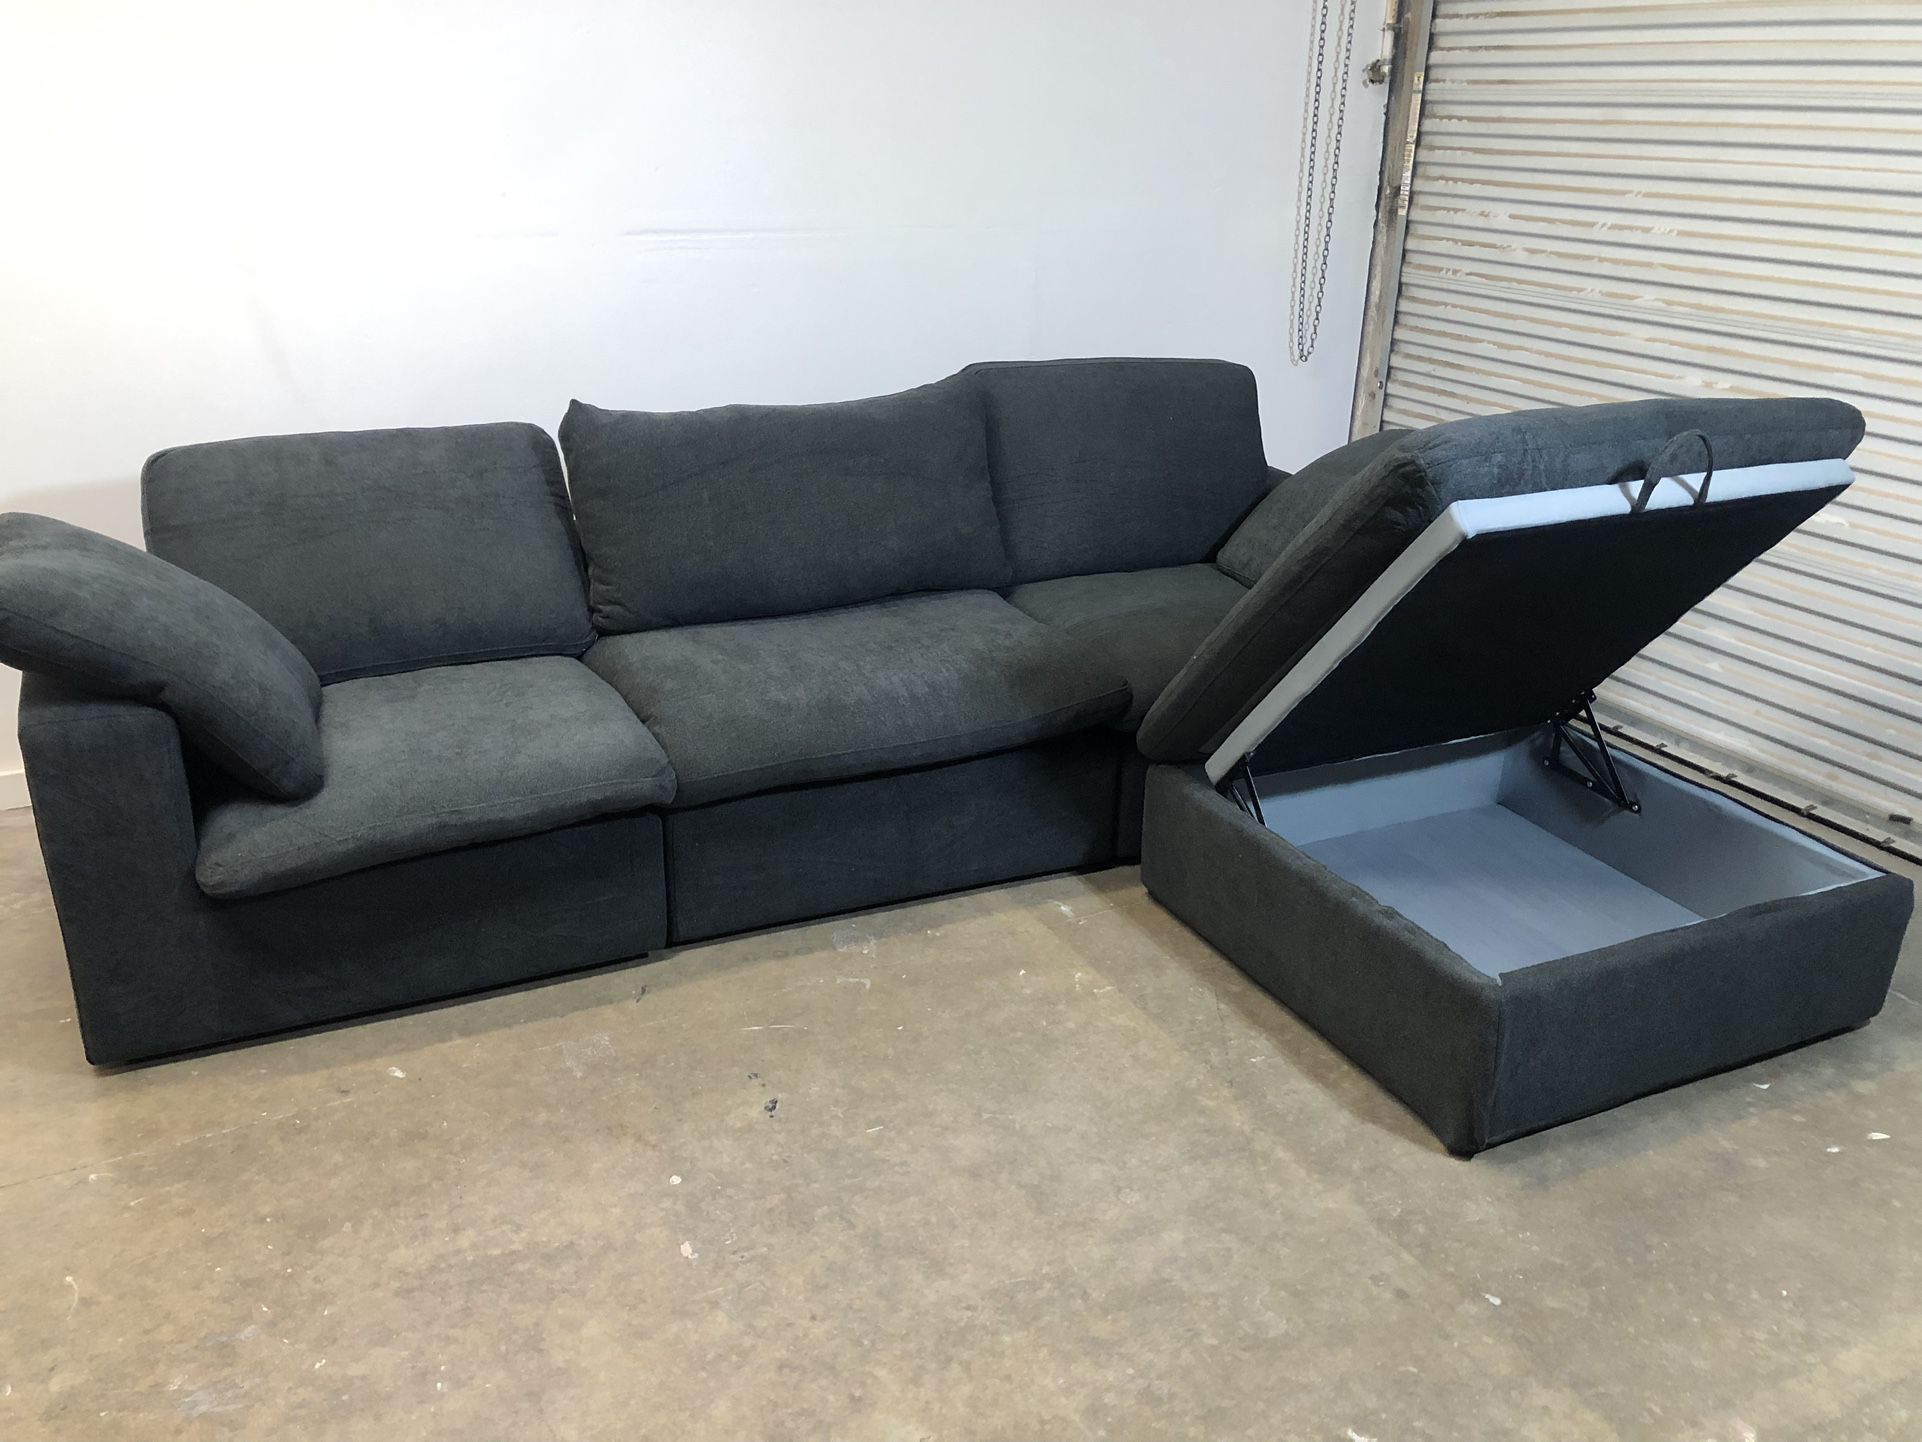 FREE DELIVERY- Brand New Charcoal Grey Cloud Couch